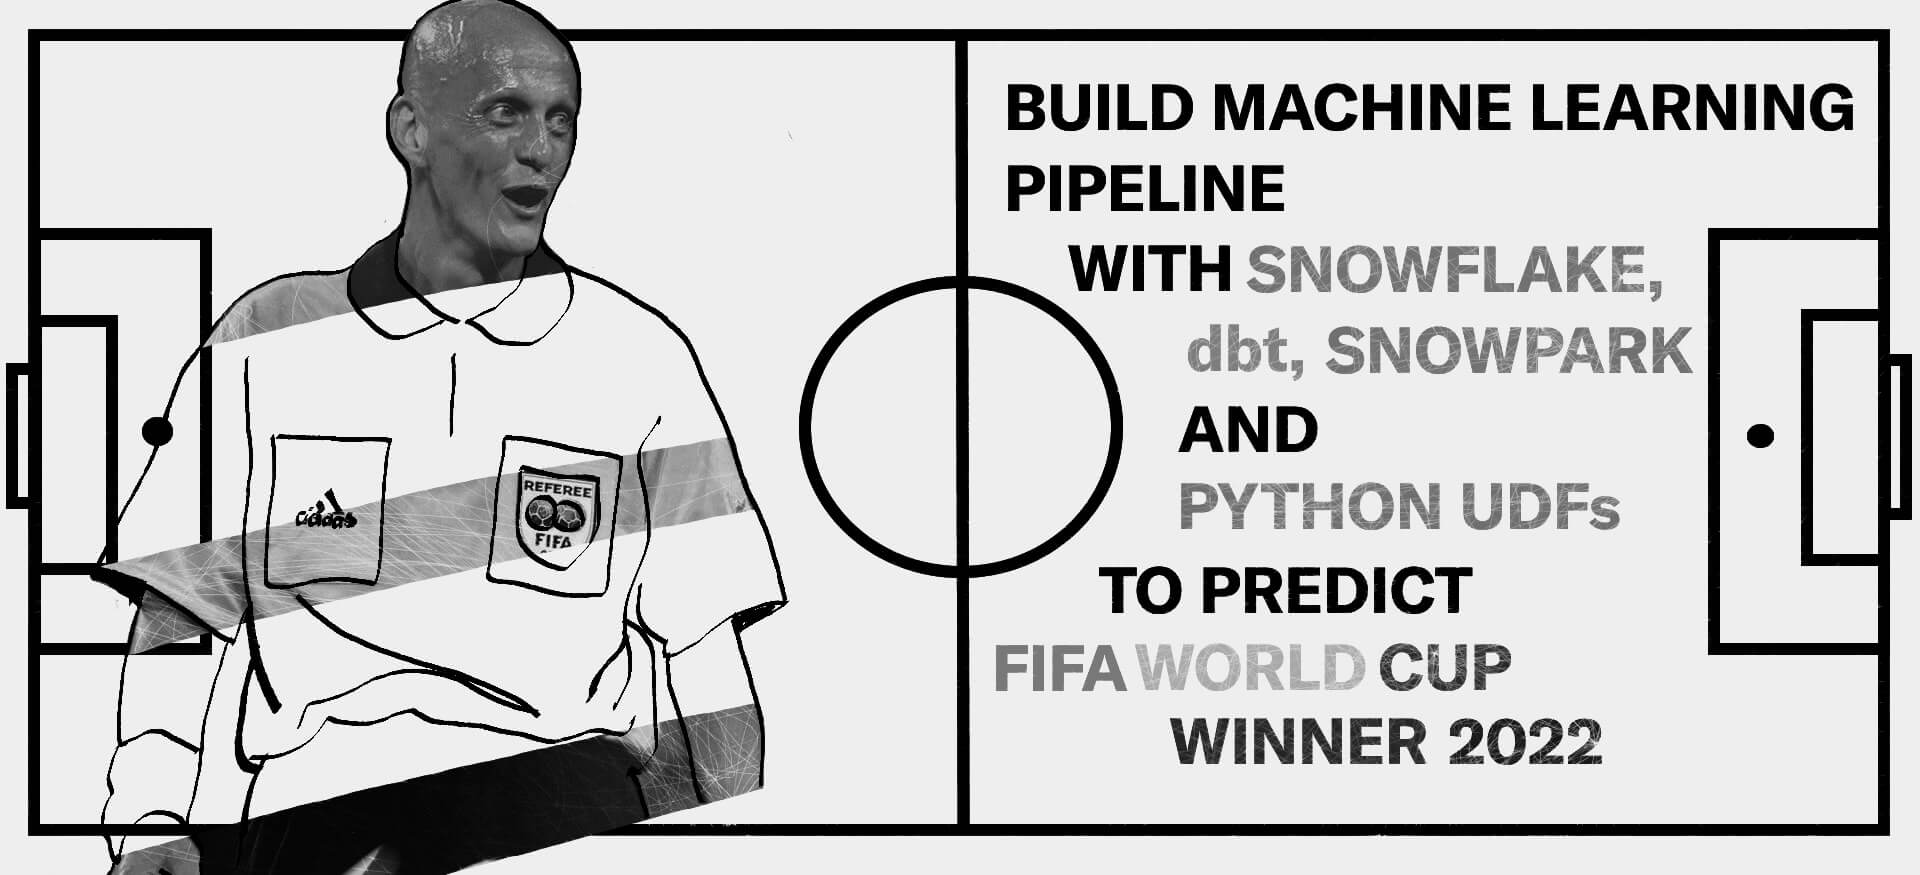 Build Machine Learning Pipeline with Snowflake, dbt, Python UDFs and Snowpark to Predict FIFA World Cup winner